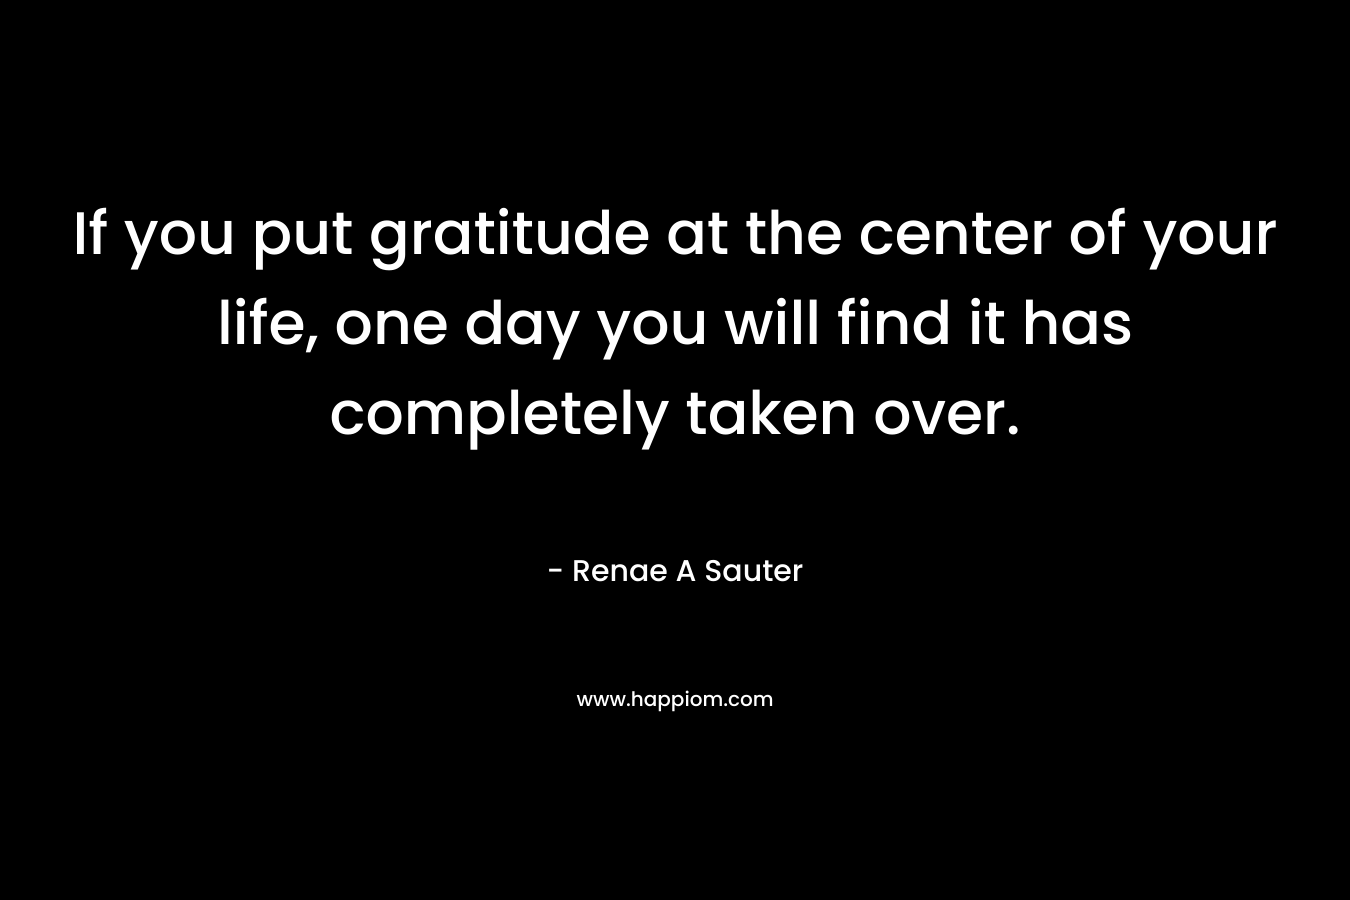 If you put gratitude at the center of your life, one day you will find it has completely taken over.